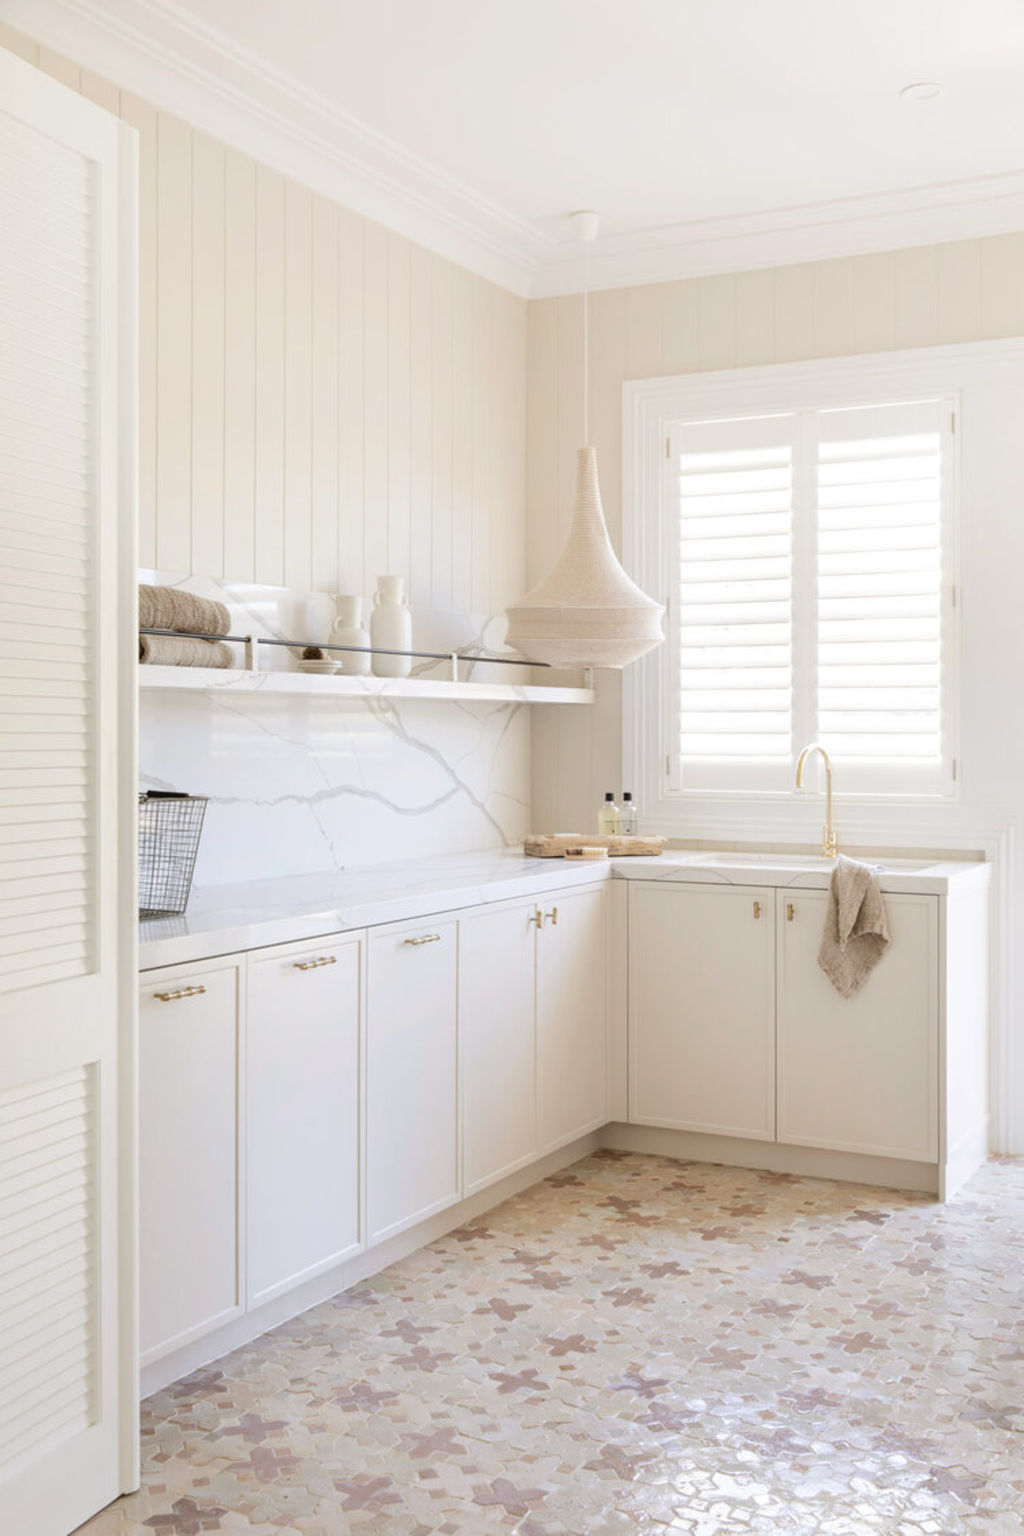 Custom cabinetry is a wise investment. Photo: Jacqui Turk